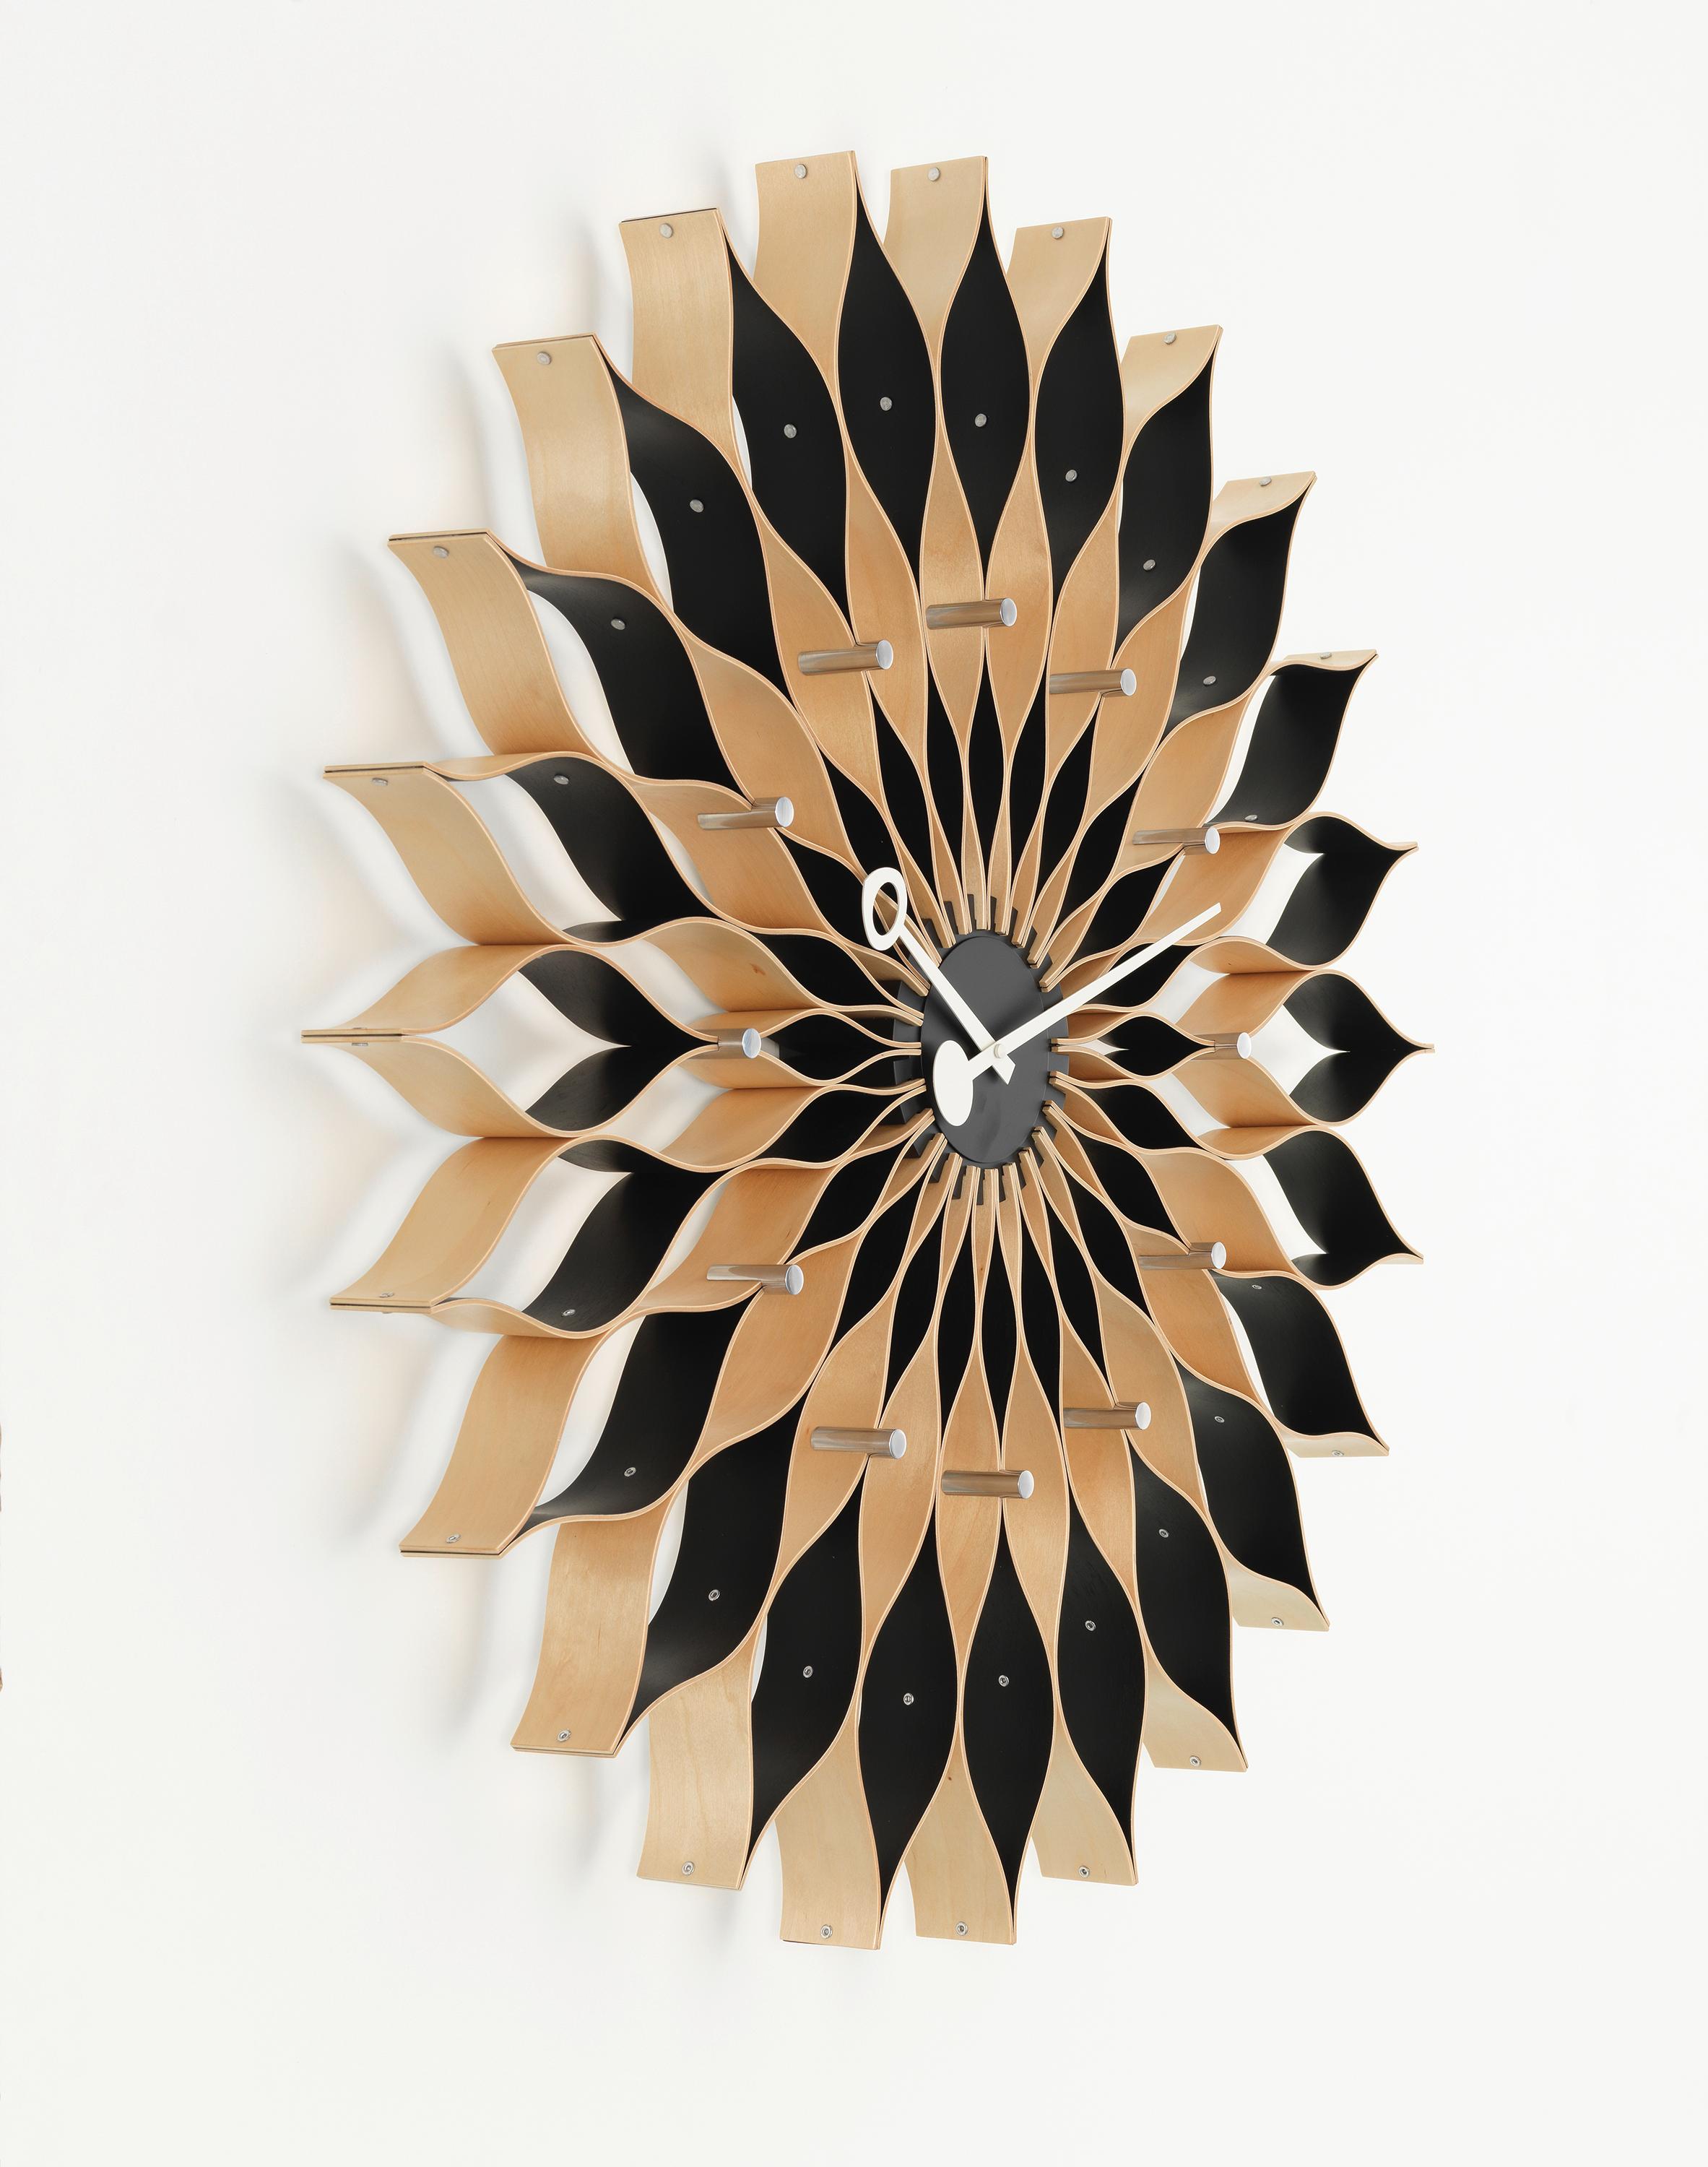 Swiss Vitra Sunflower Clock in Birch Wood by George Nelson For Sale